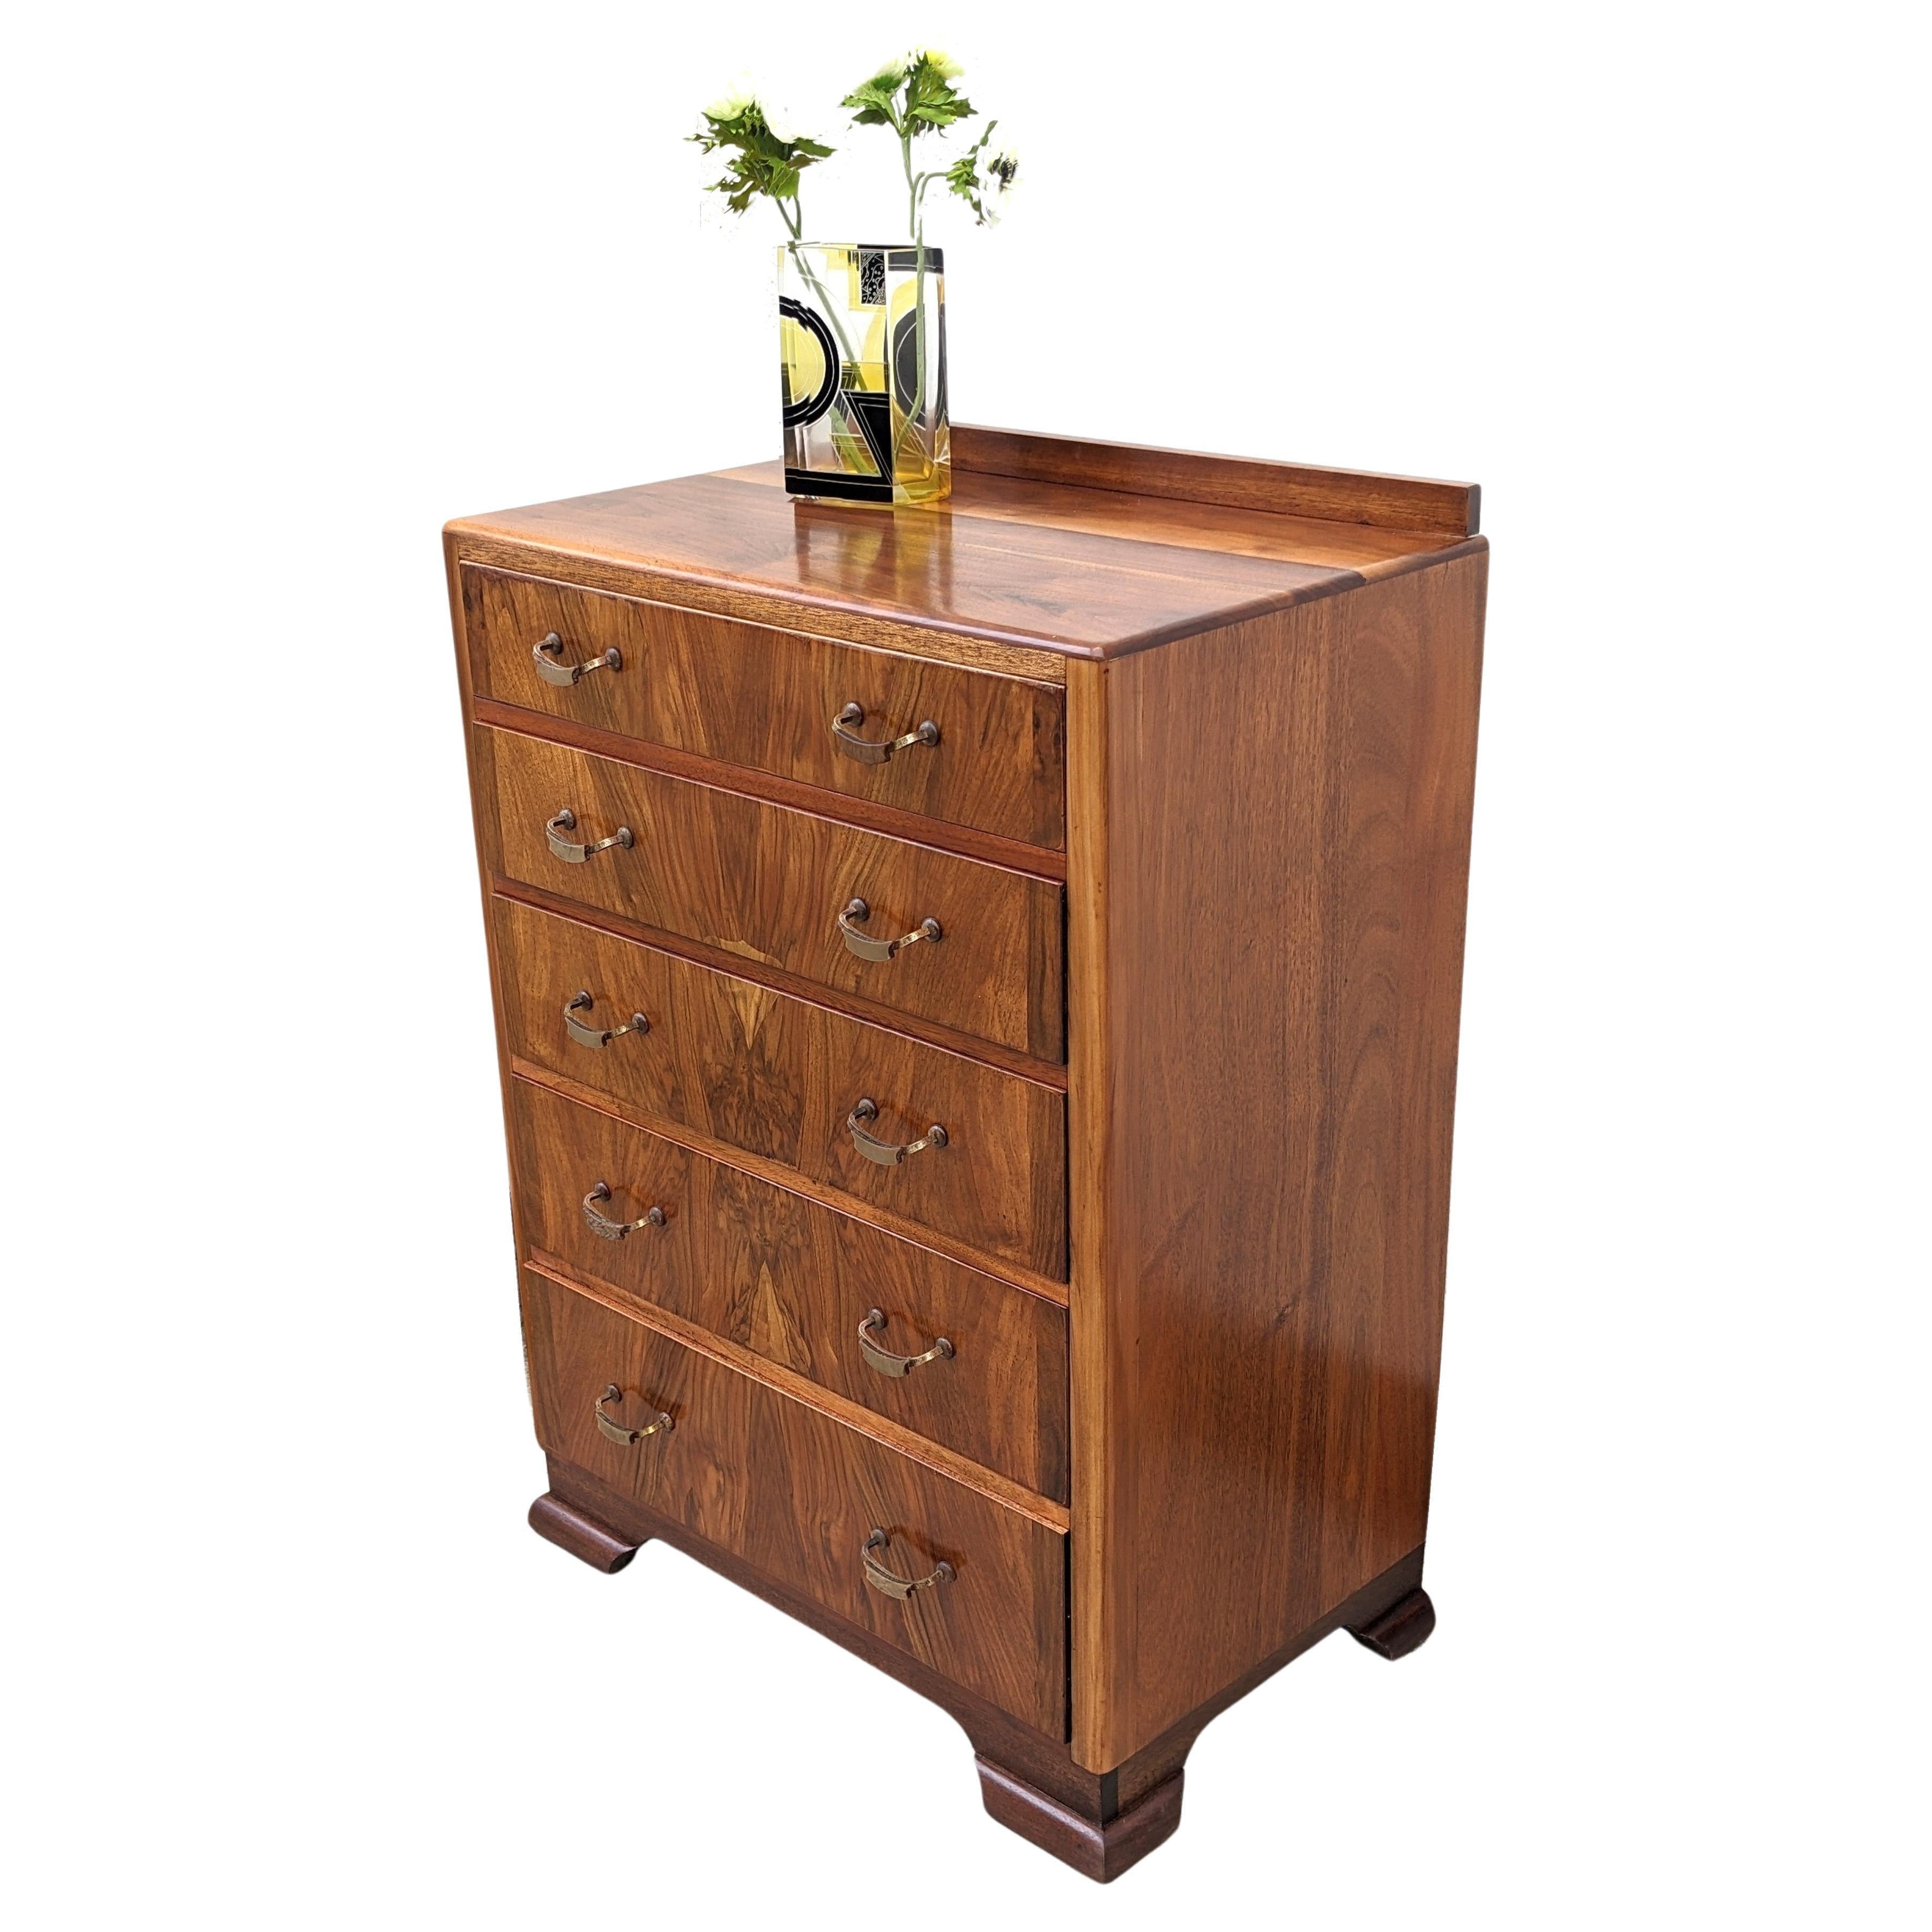 For your consideration is this very stylish and beautifully figured Walnut original Art Deco chest of drawers which dates to the 1930's. Five generously sized drawers which are veneered in a warm mid tone figured walnut veneer with original bakelite